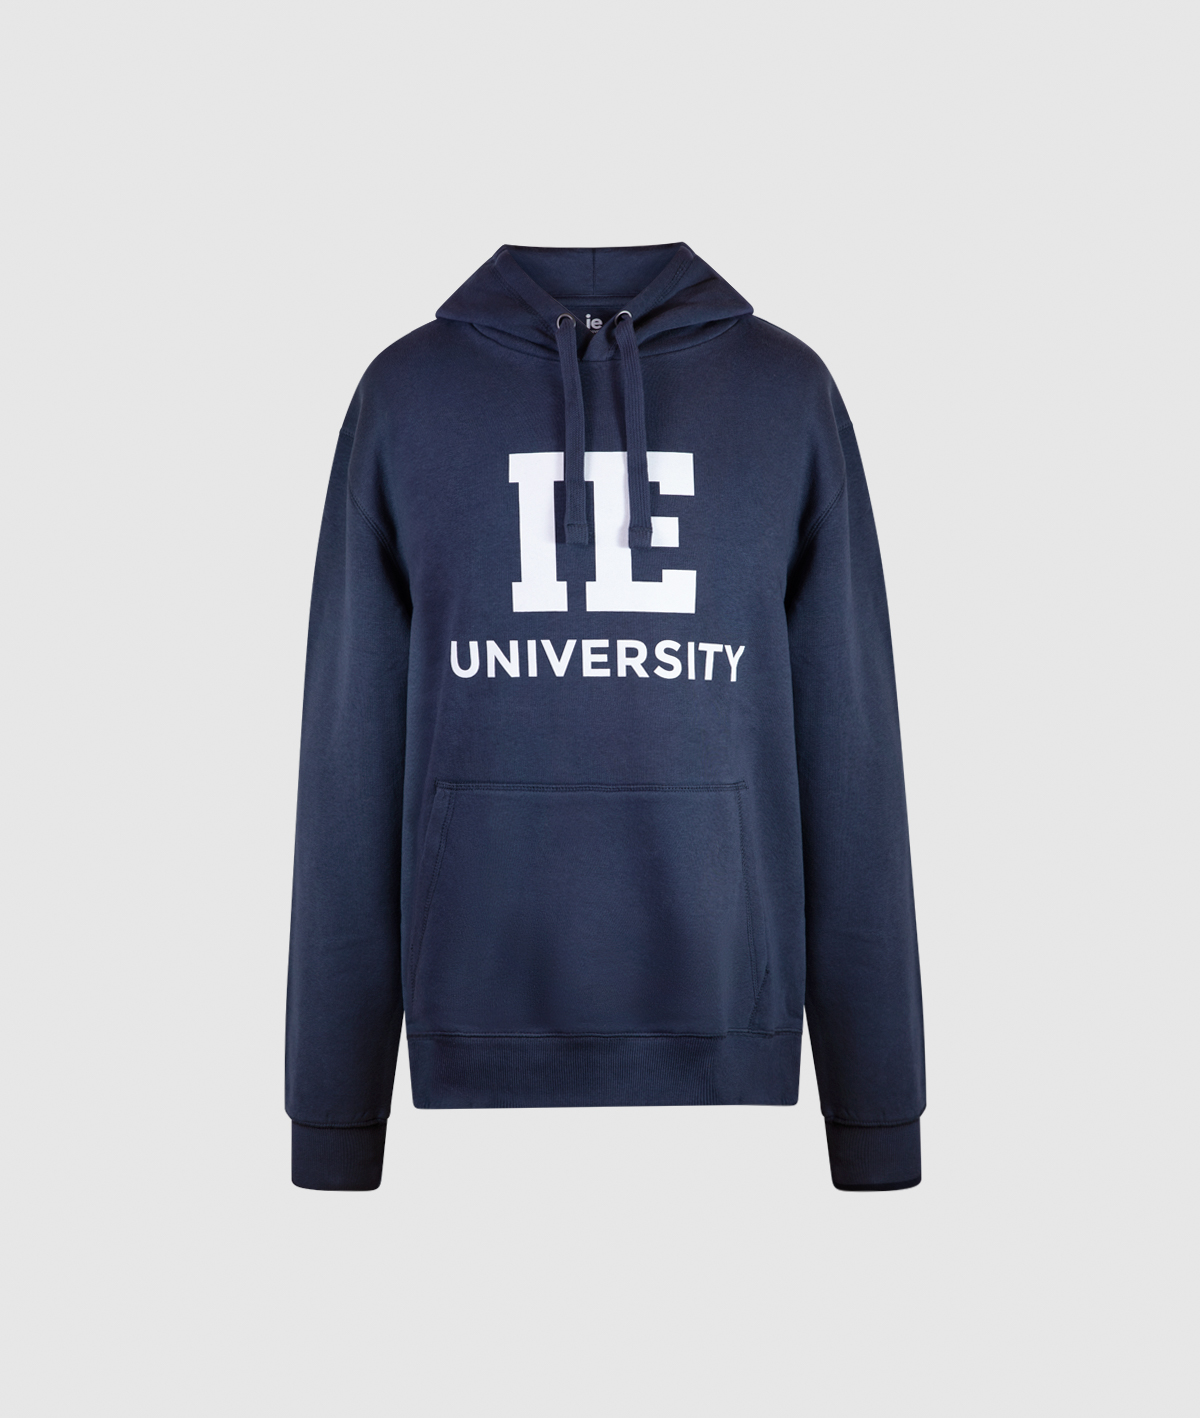 Spencer IE University Hoodie. Navy color front